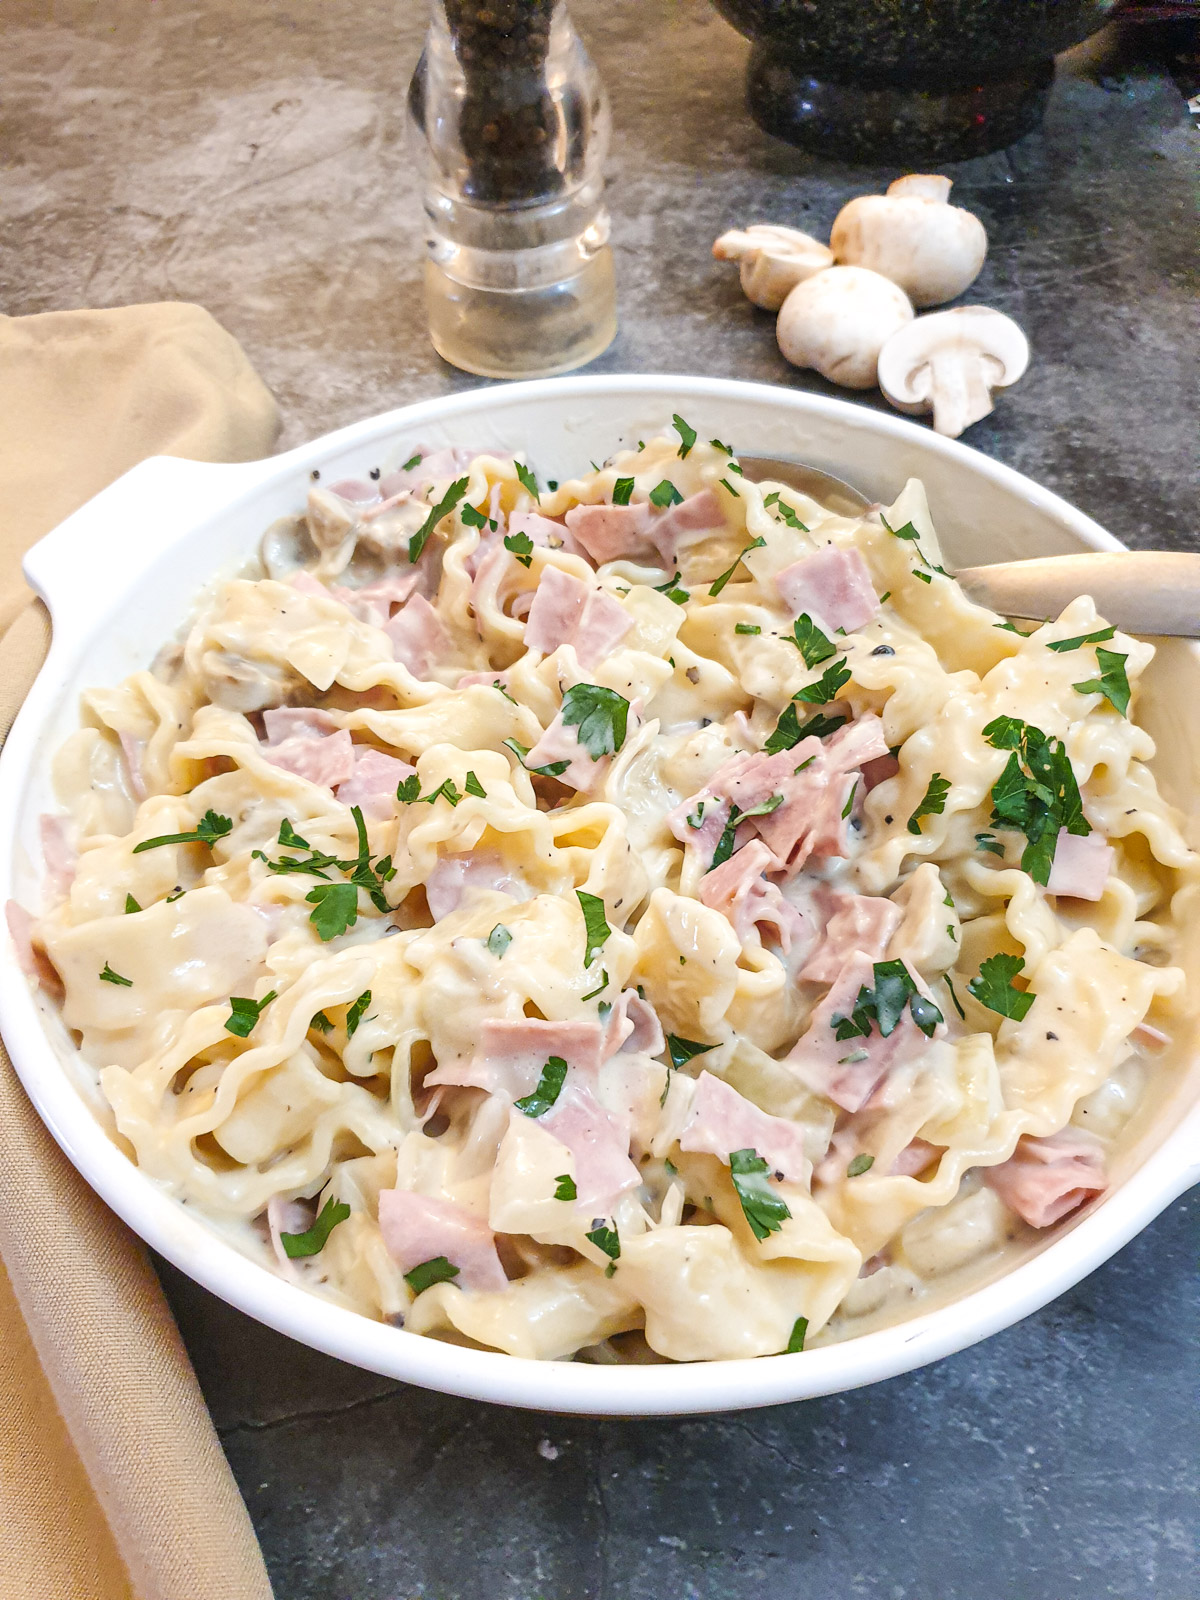 Ham and mushroom tagliatelle in a dish on a table.